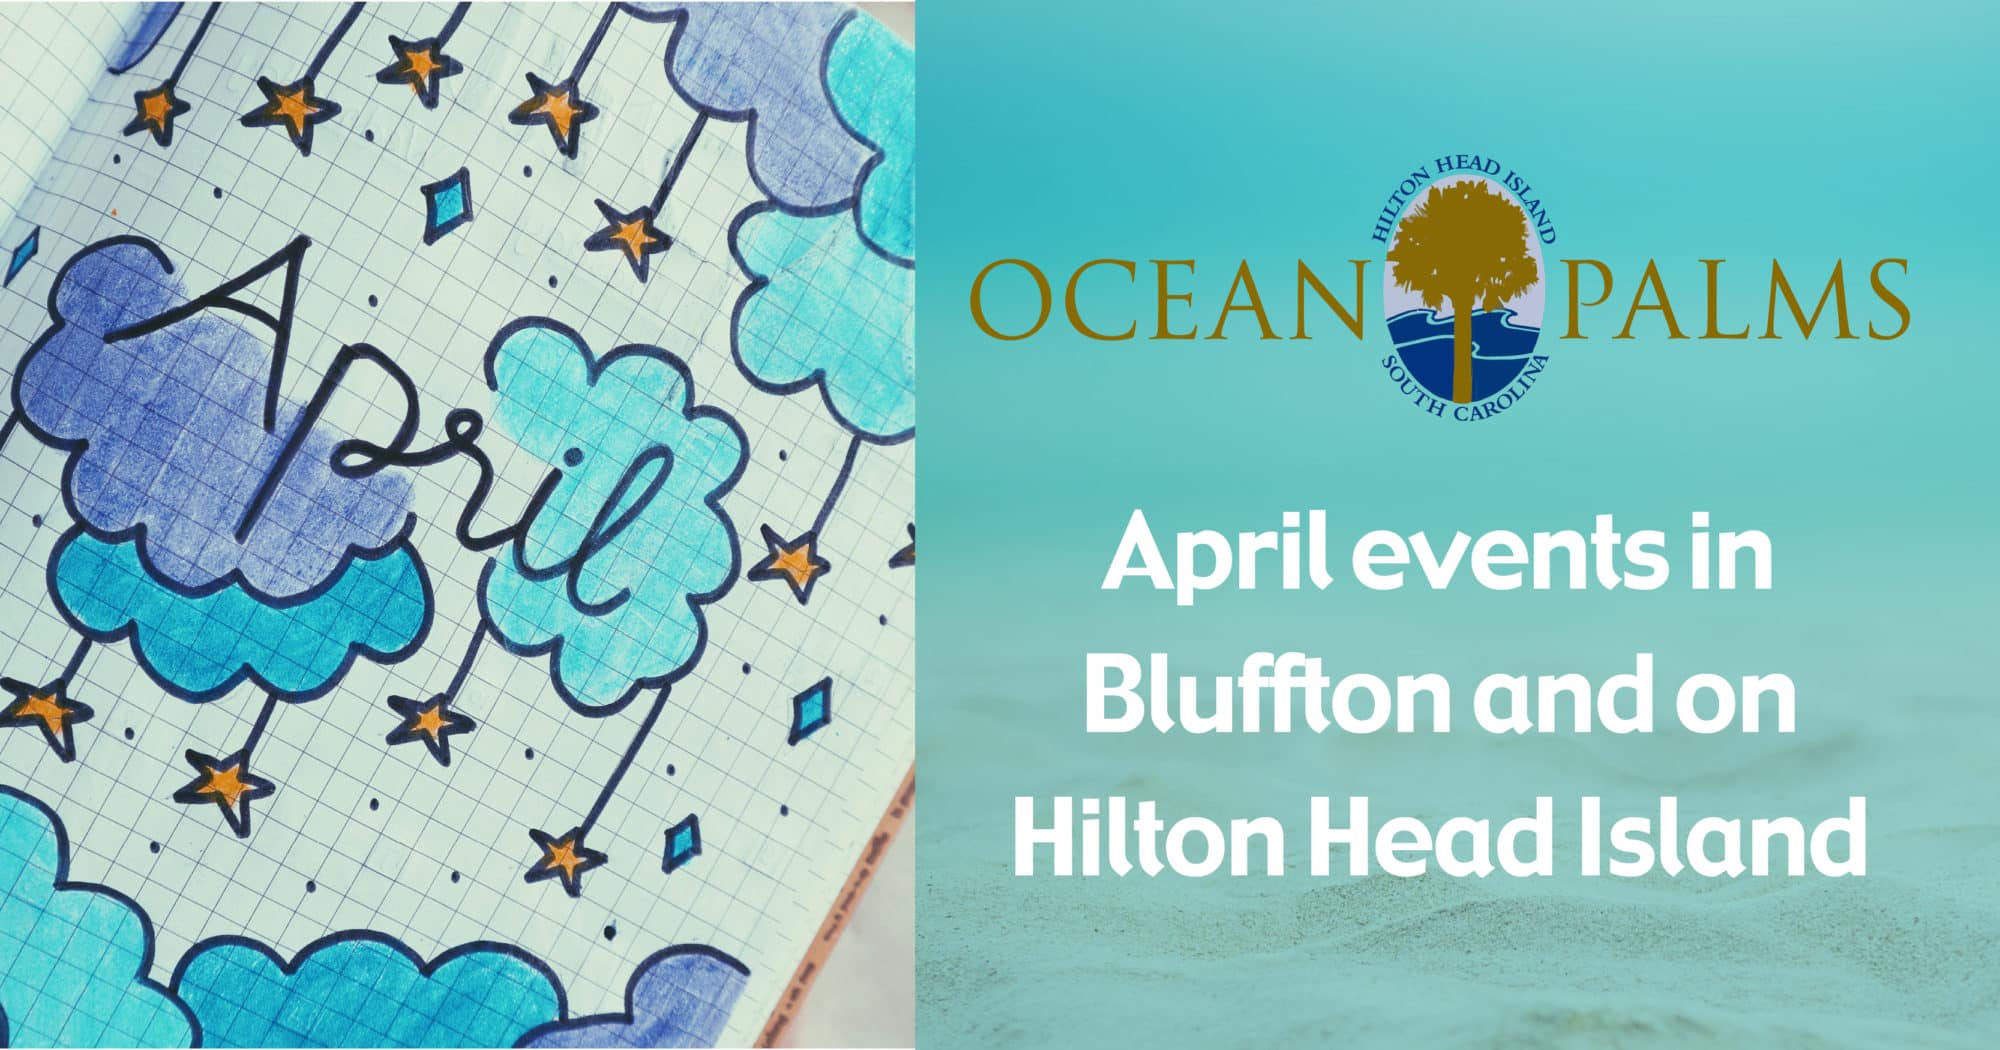 April calendar of events for Bluffton and Hilton Head SC